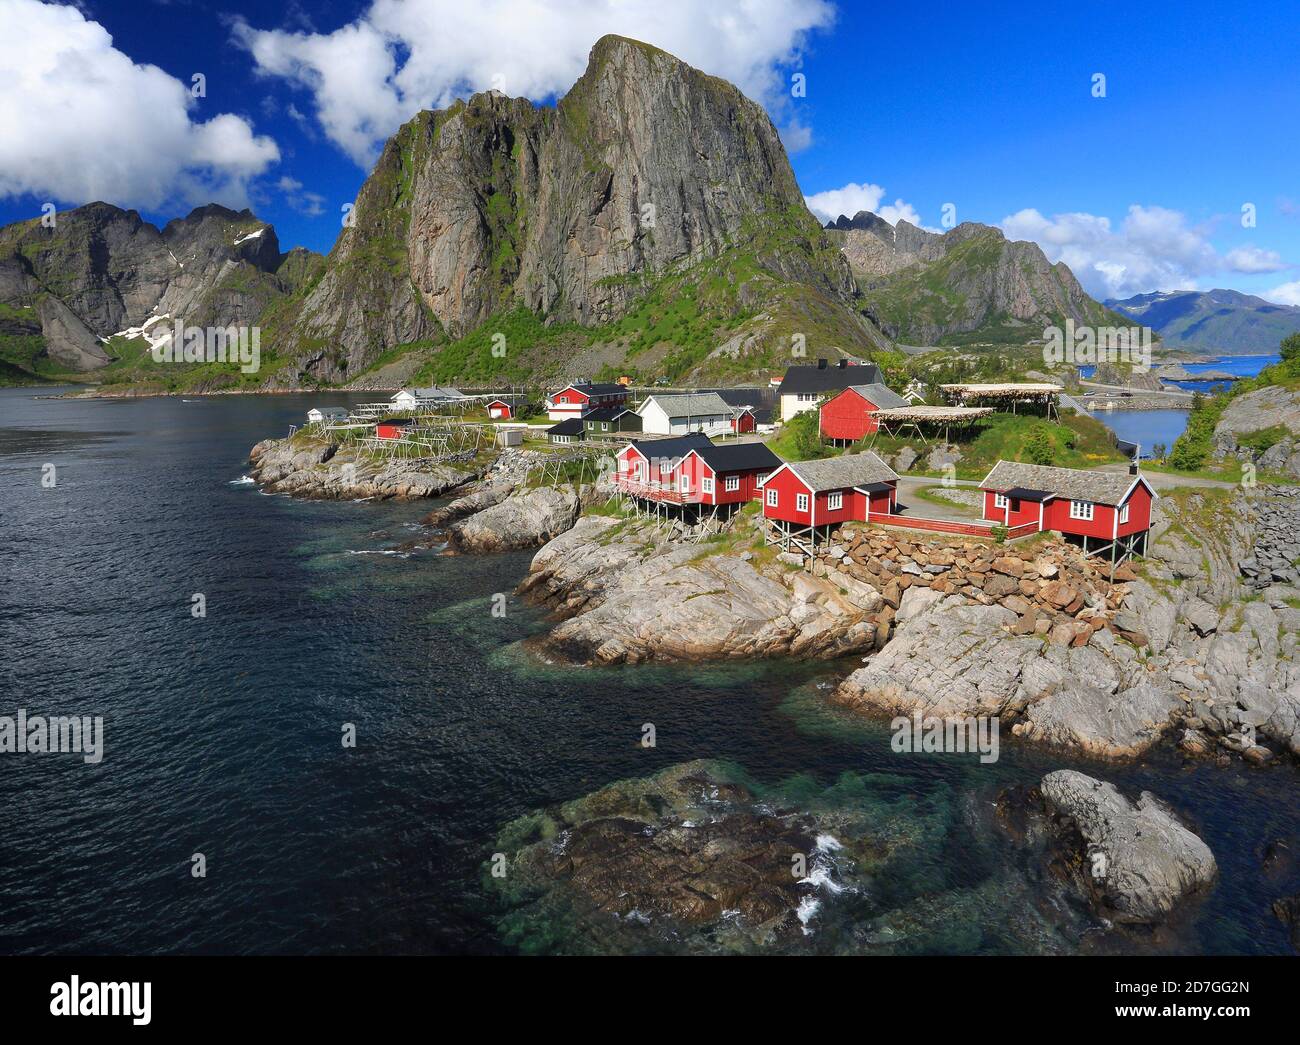 Traditional red Norwegian fishing huts on the border of the ocean, Hamnoy Island in Lofoten, northern Norway Stock Photo